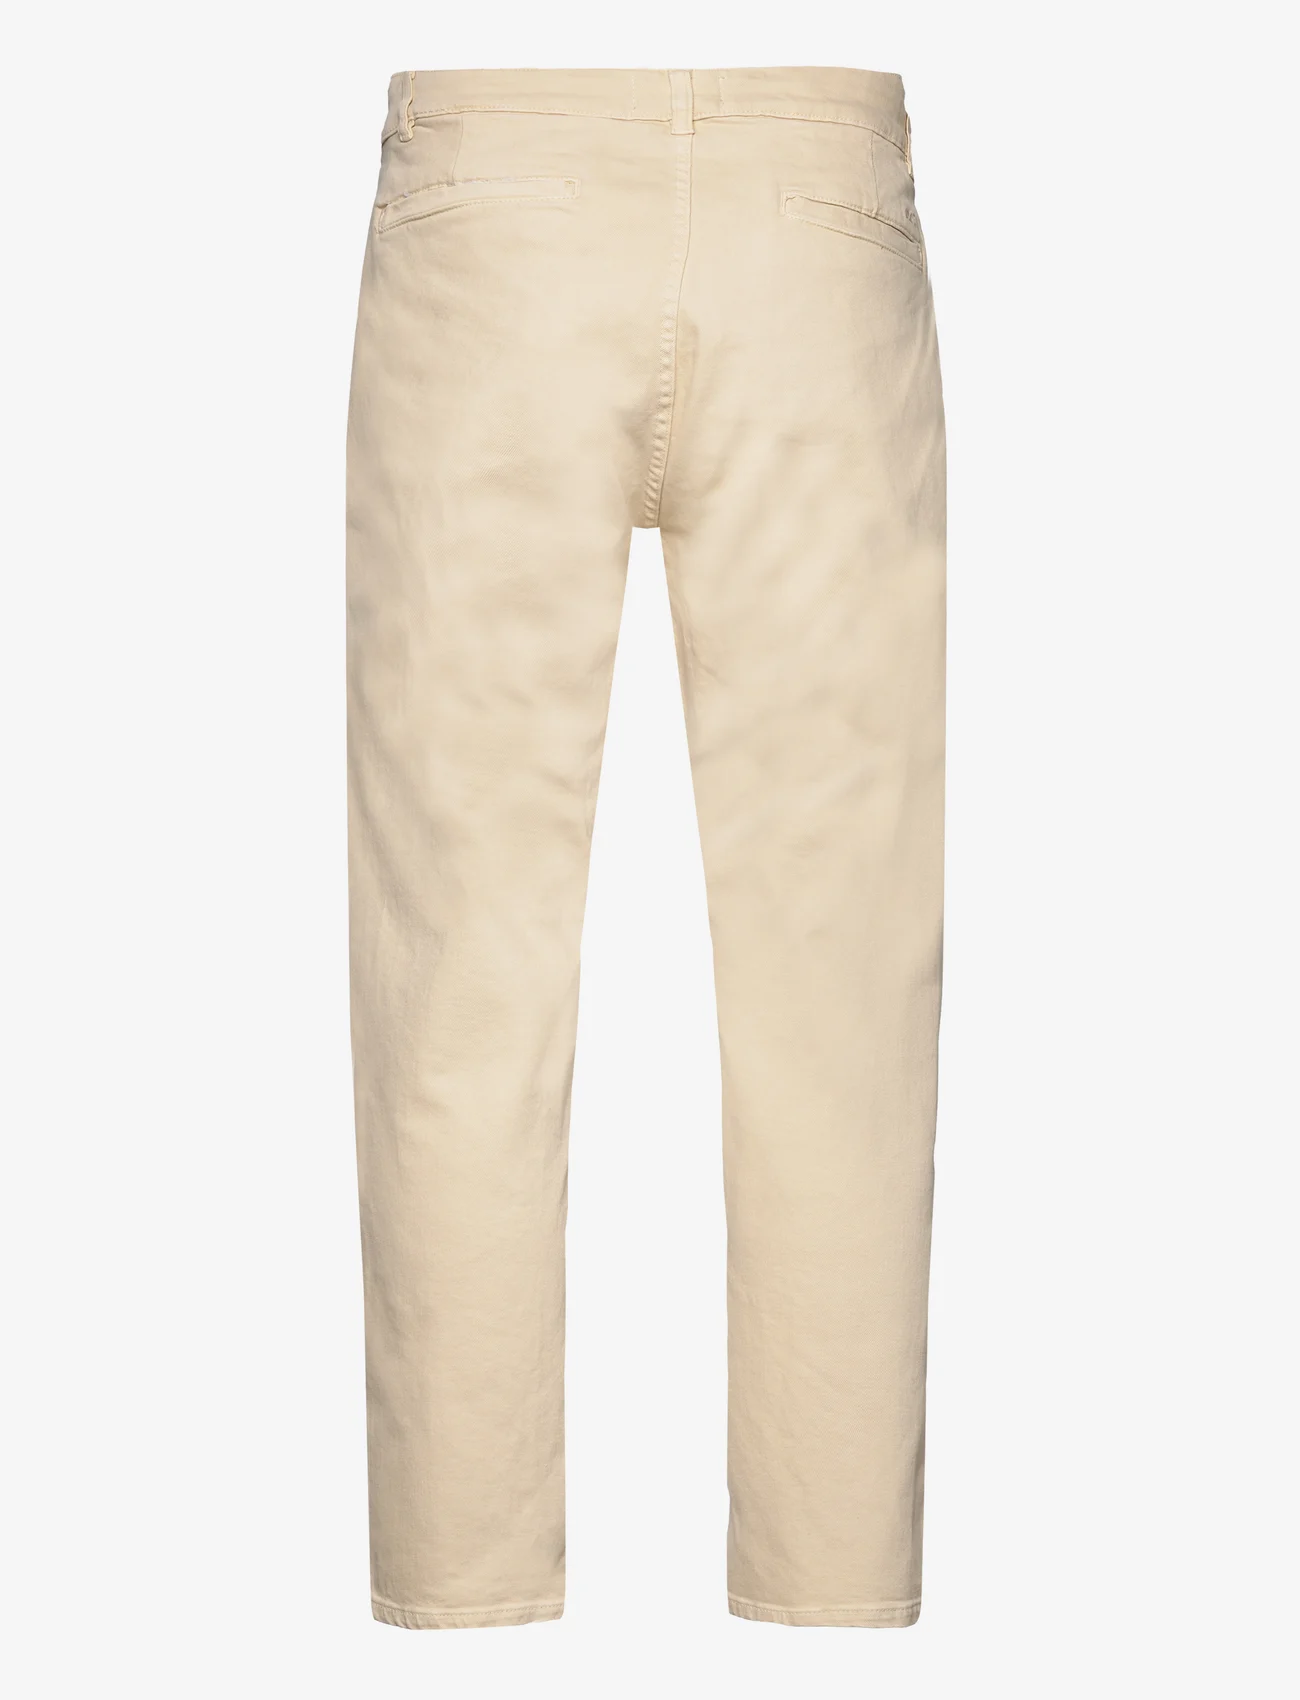 Denim project - DPChino Recycled Pants - chinos - bleached sand - 1